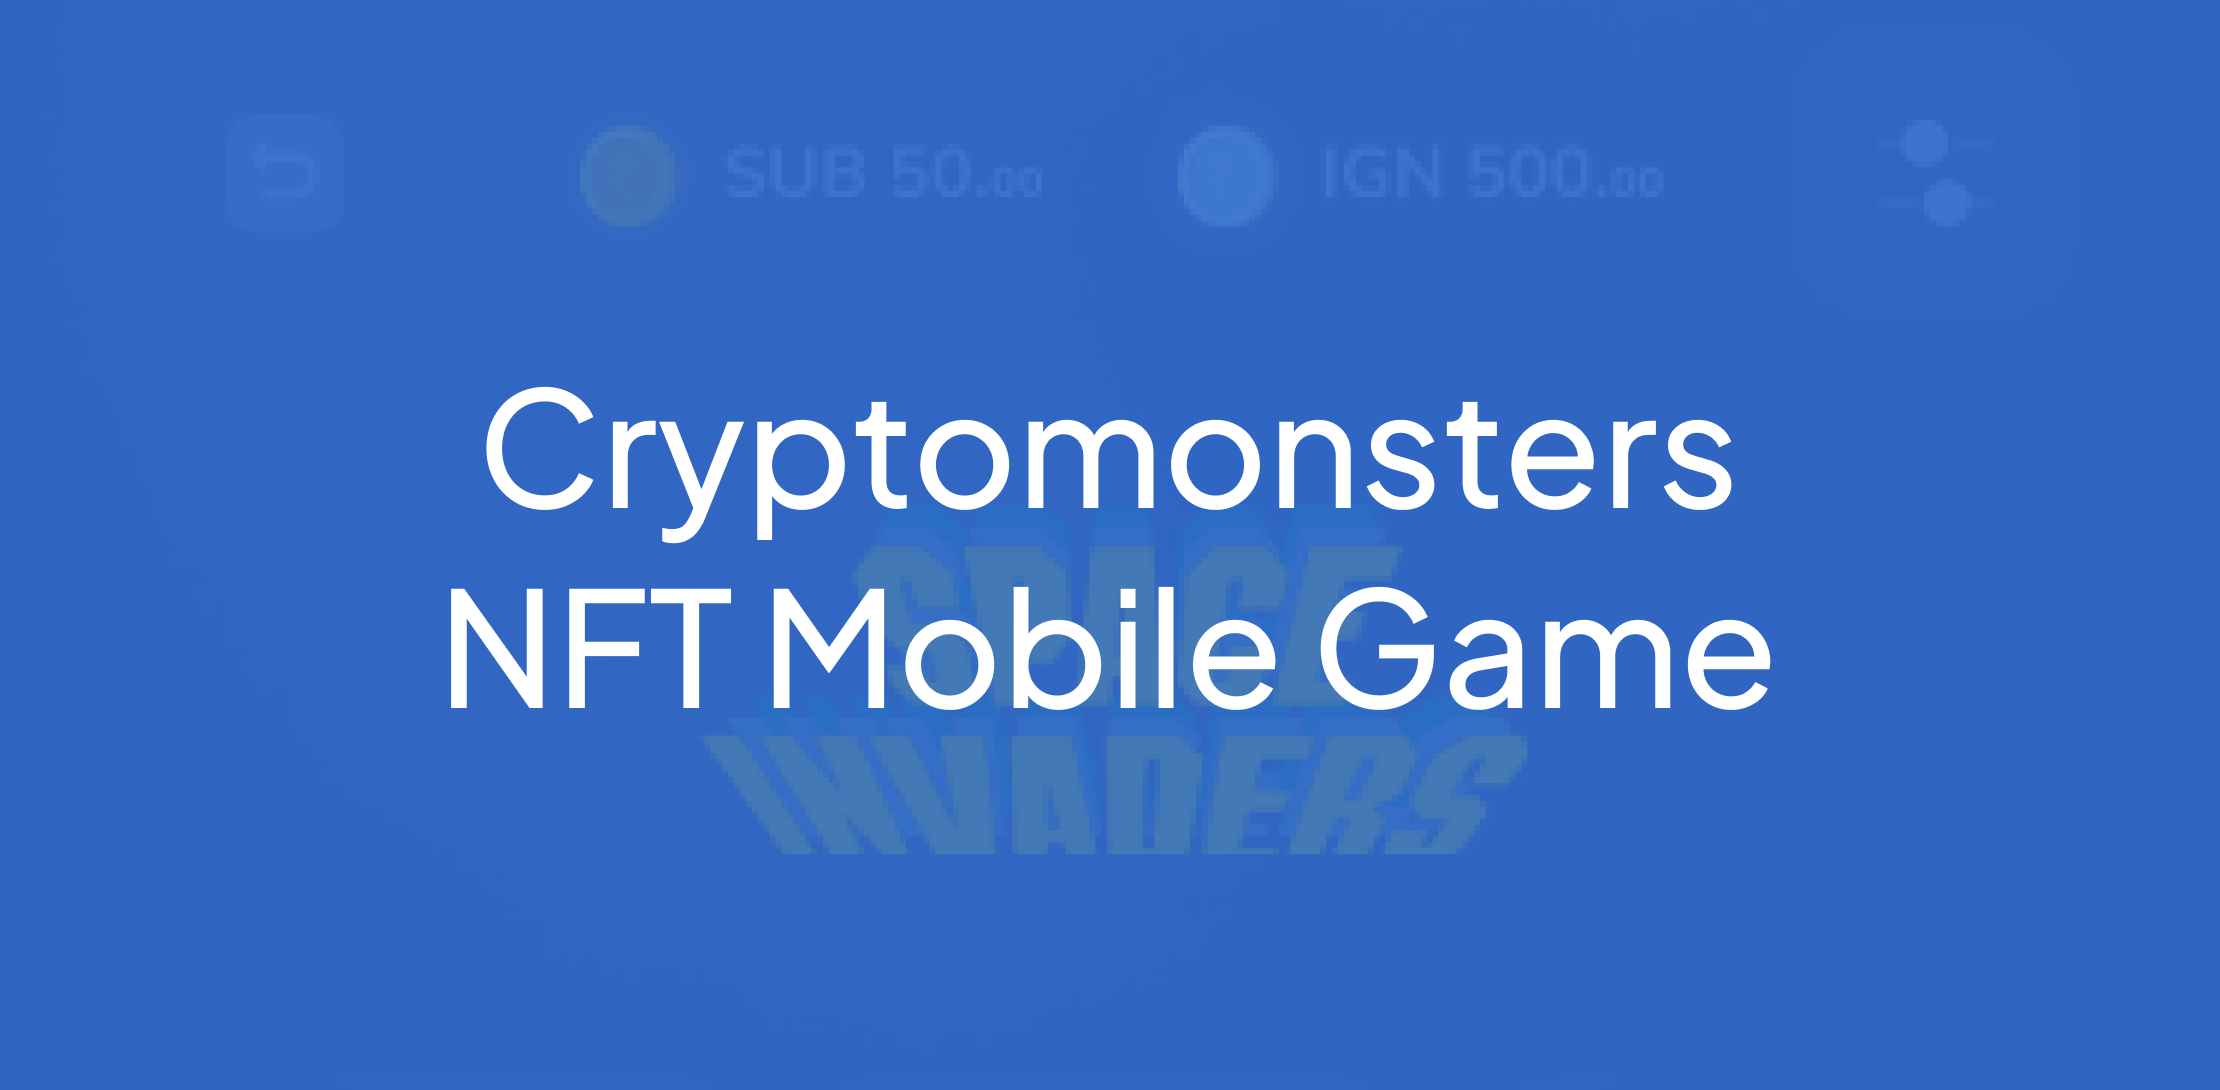 CRYPTOMONSTERS NFT MOBILE GAME